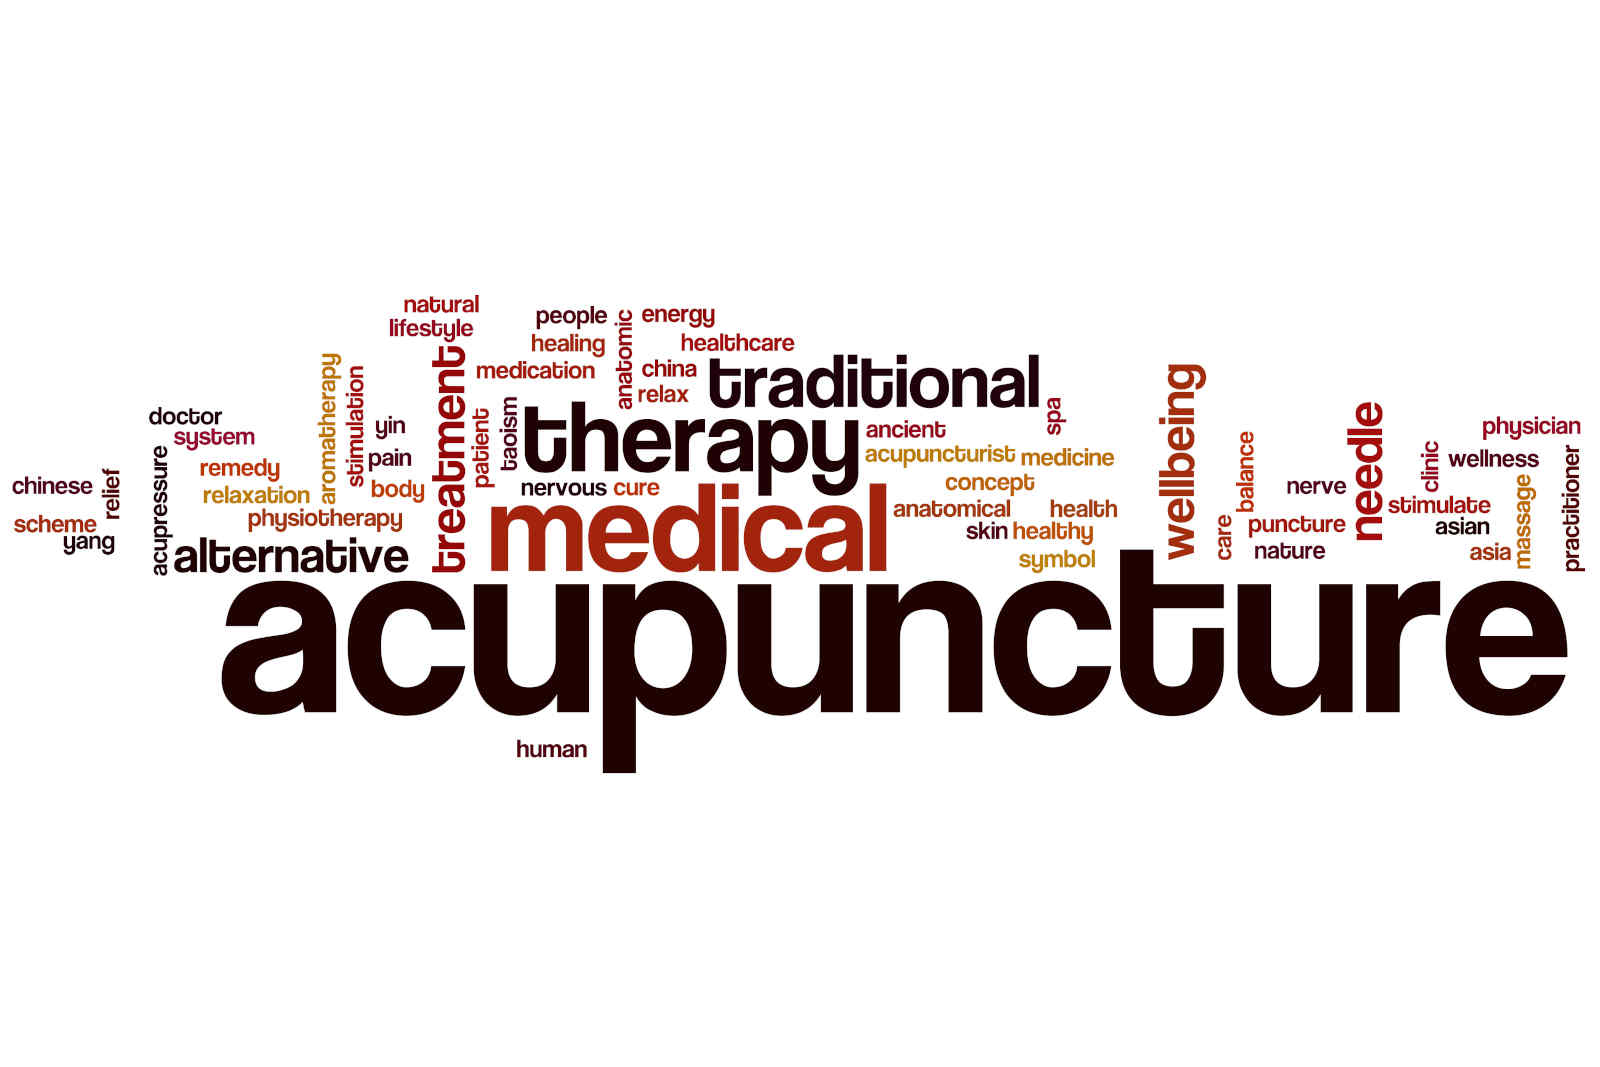 what is acupuncture